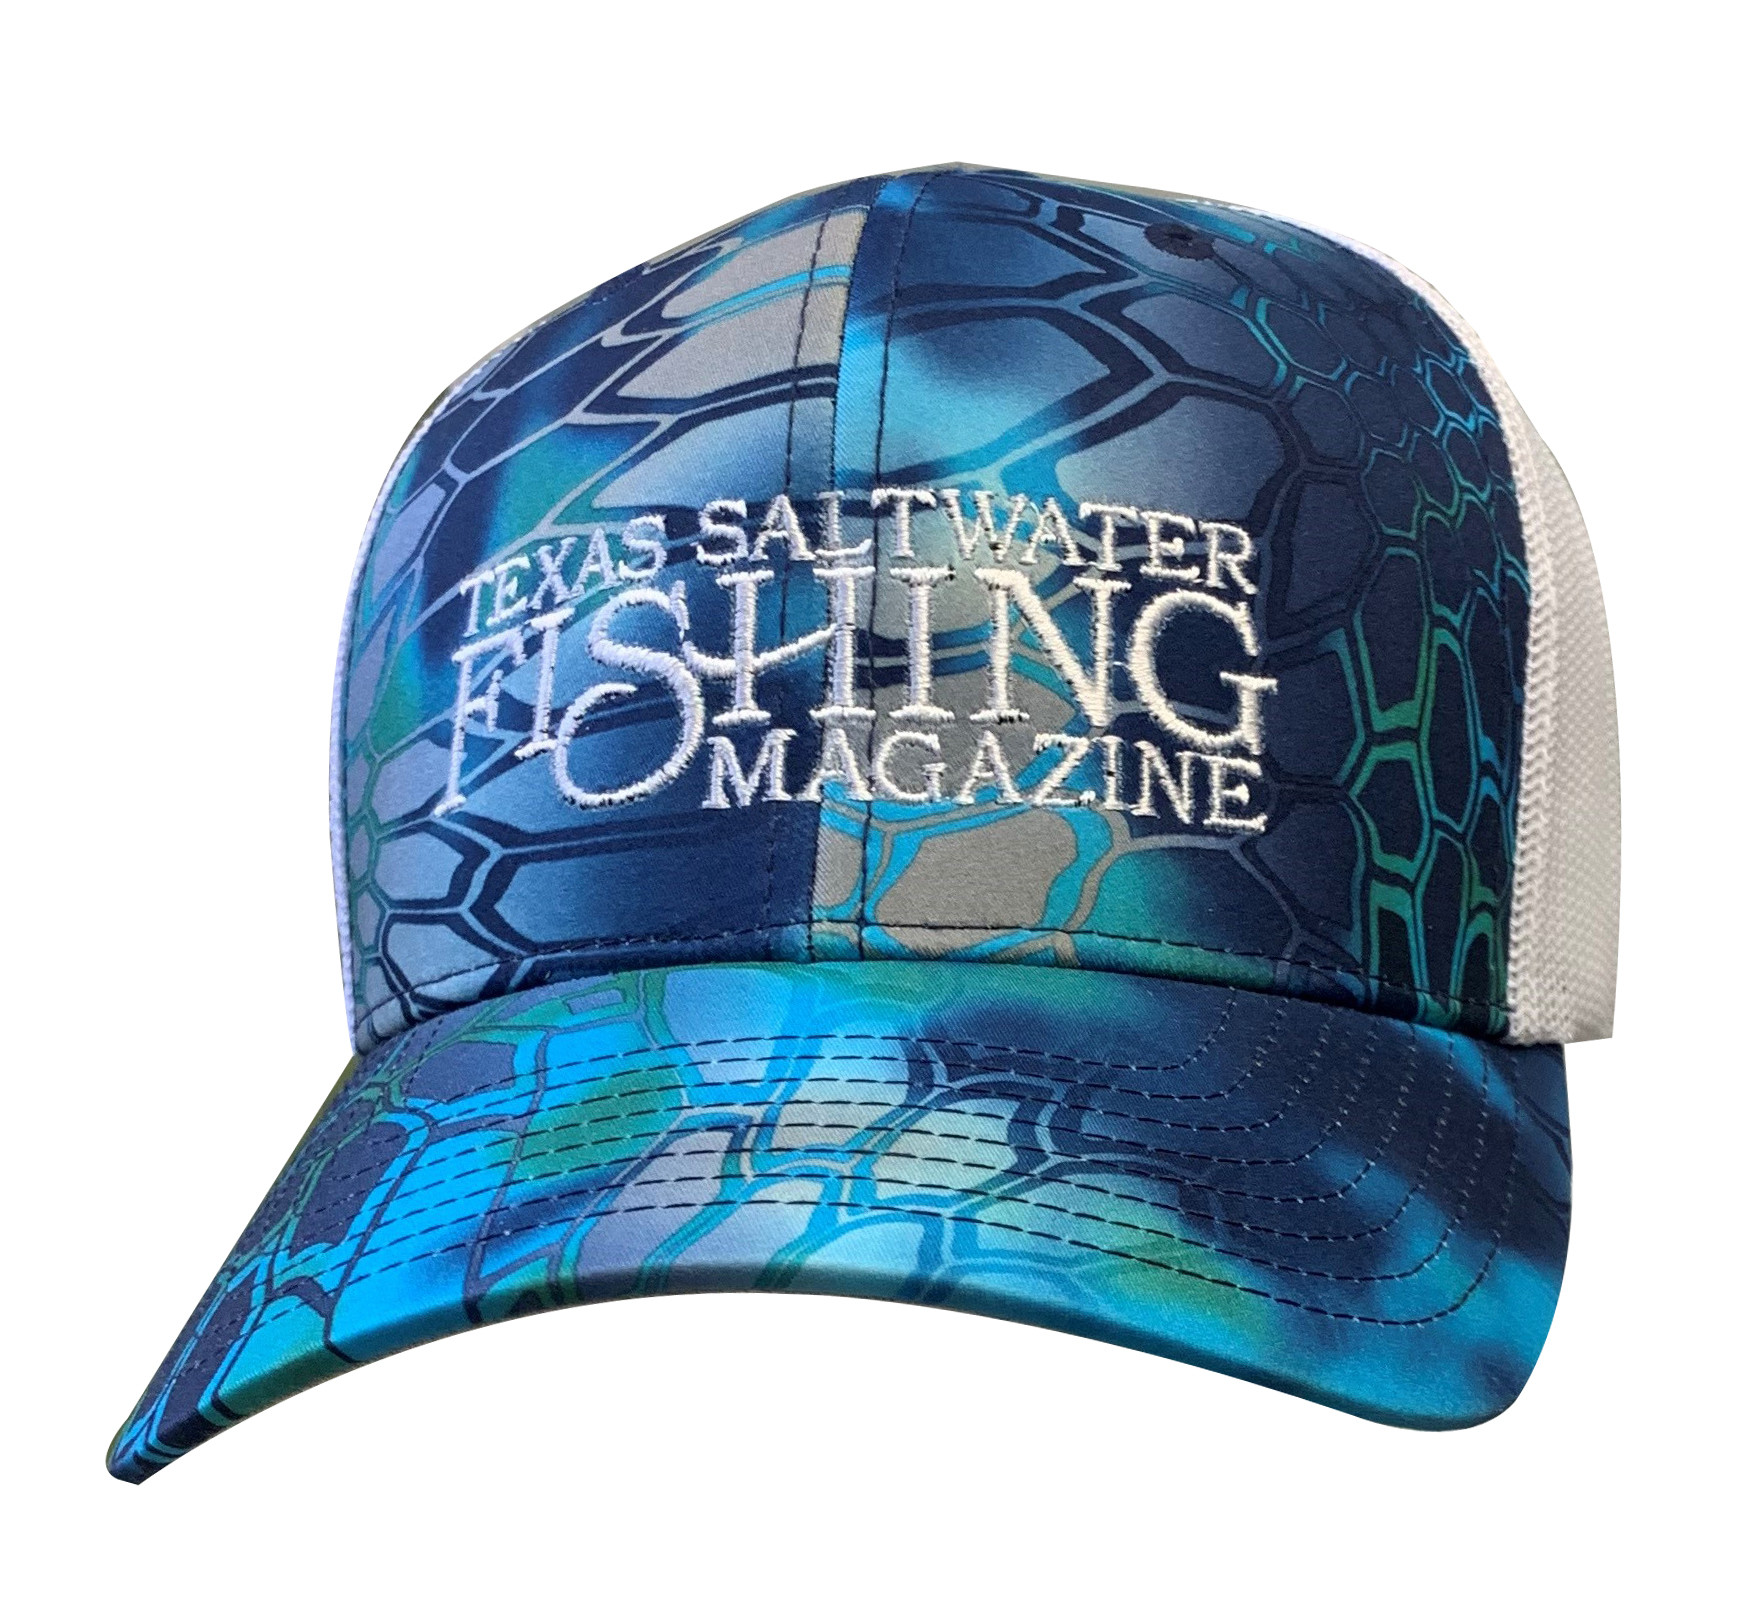 TSF Mag Hat - Full Logo (VIEW MORE COLORS!) - Texas Saltwater Fishing  Magazine